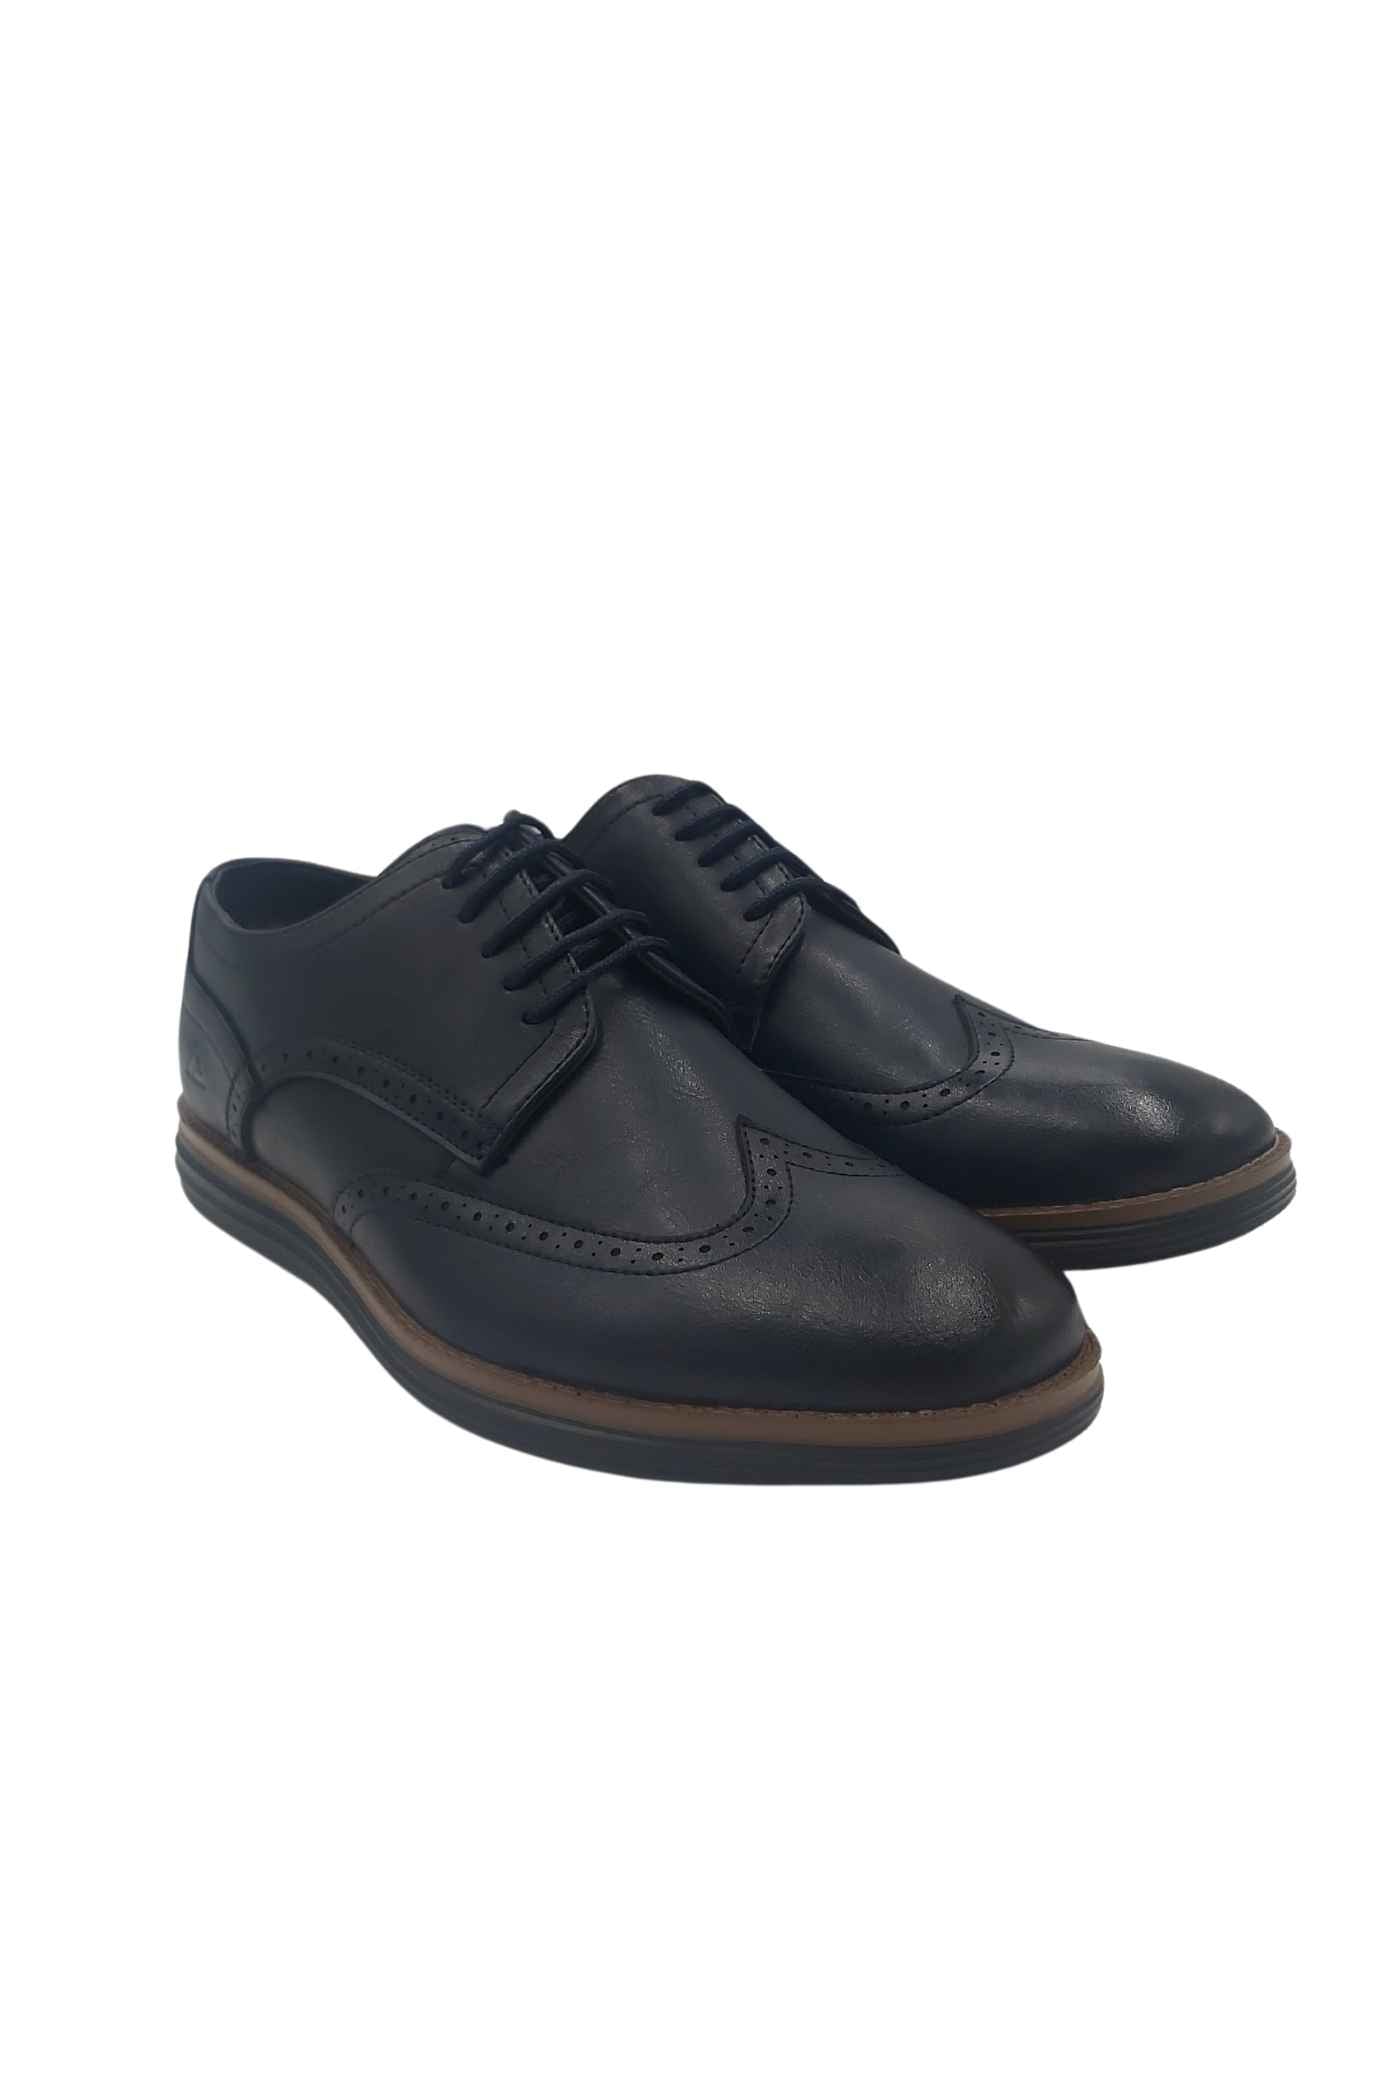 Greenpoint Navy Lace Shoe